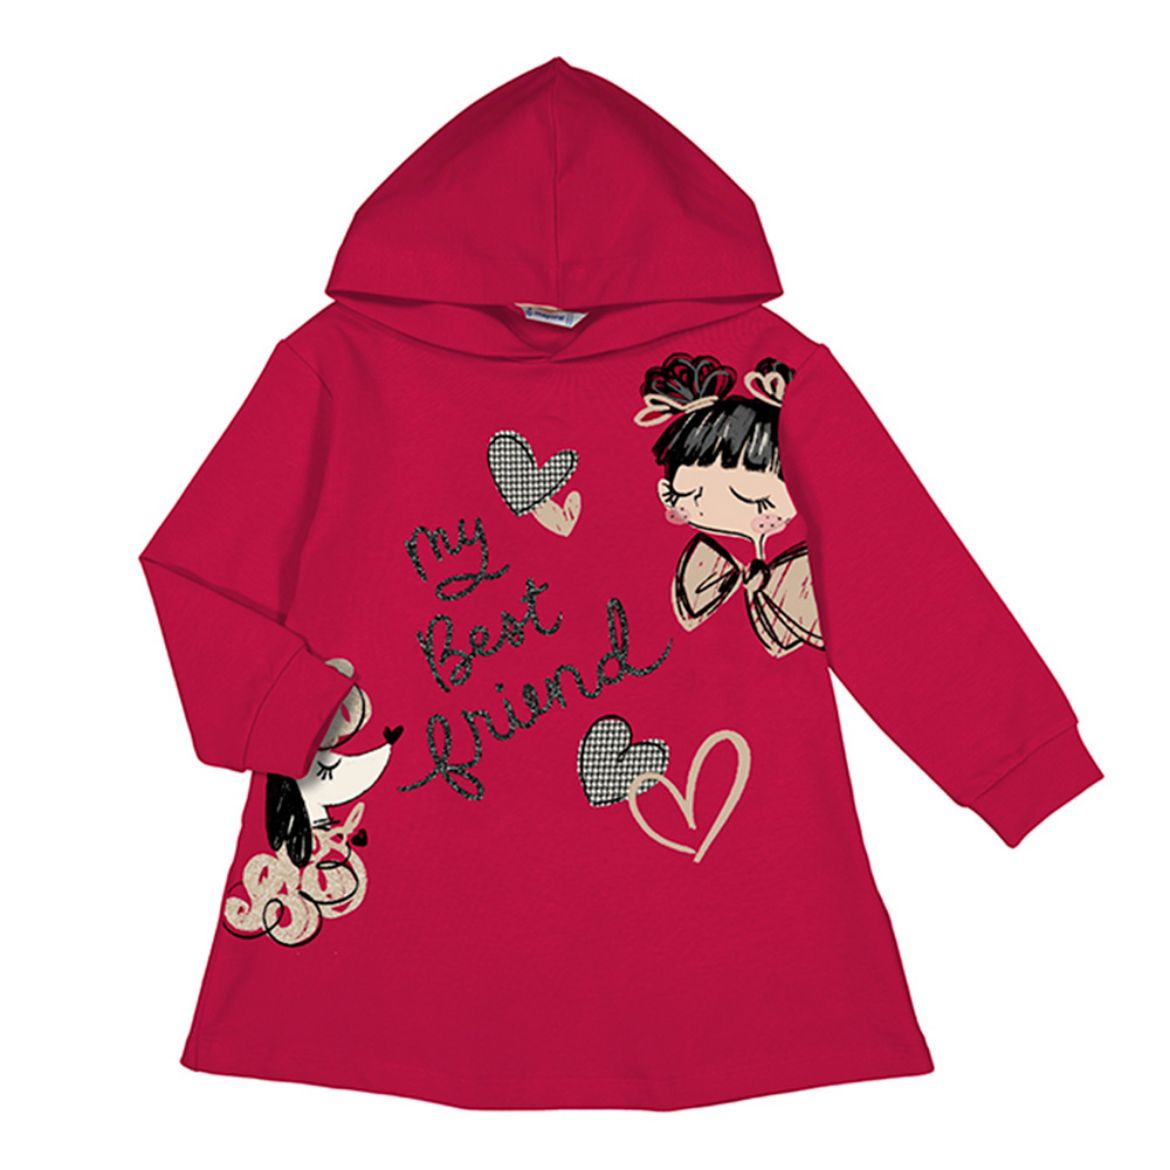 Picture of Mayoral Girls 'My Best Friend' Hooded Dress